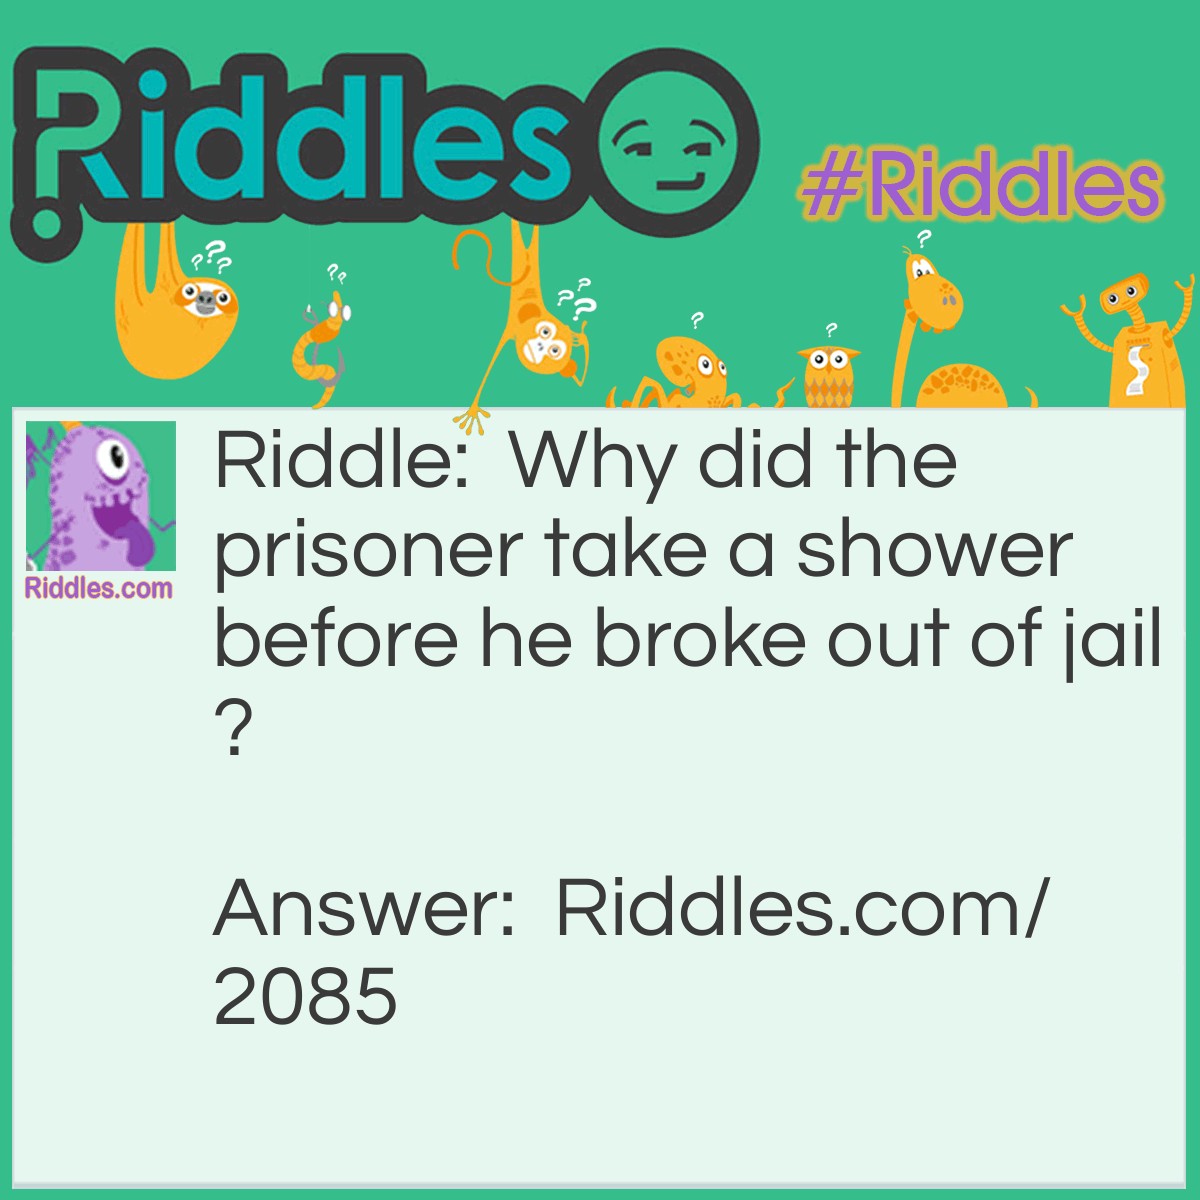 Riddle: Why did the prisoner take a shower before he broke out of jail? Answer: He wanted to make a clean getaway